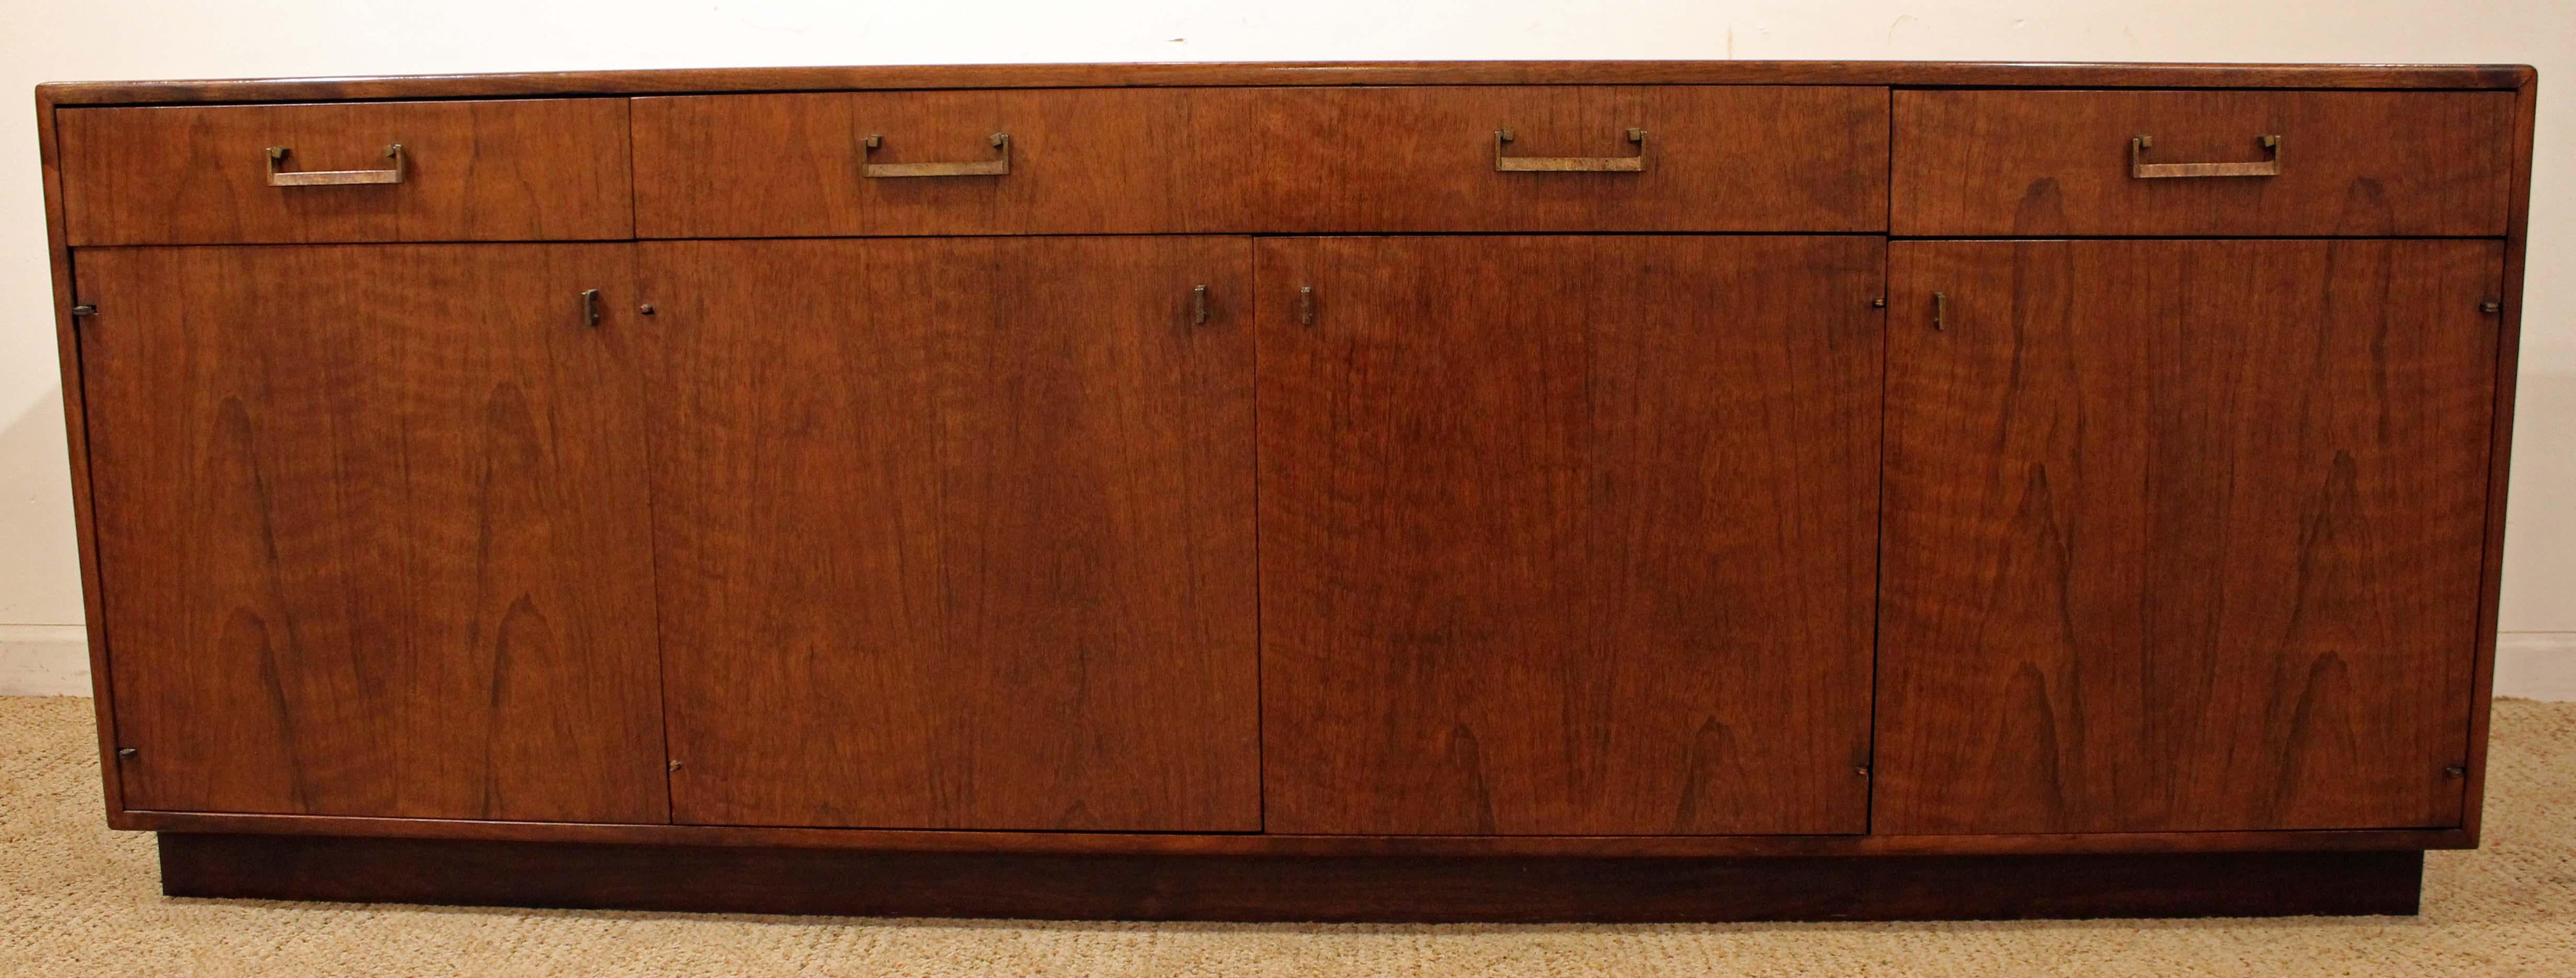 Offered is a Mid-Century Modern credenza, we believe is designed by Milo Baughman for Founders. It is made of walnut with brass pulls, featuring three dovetailed drawers up top and four doors with shelving for ample storage inside. It is in